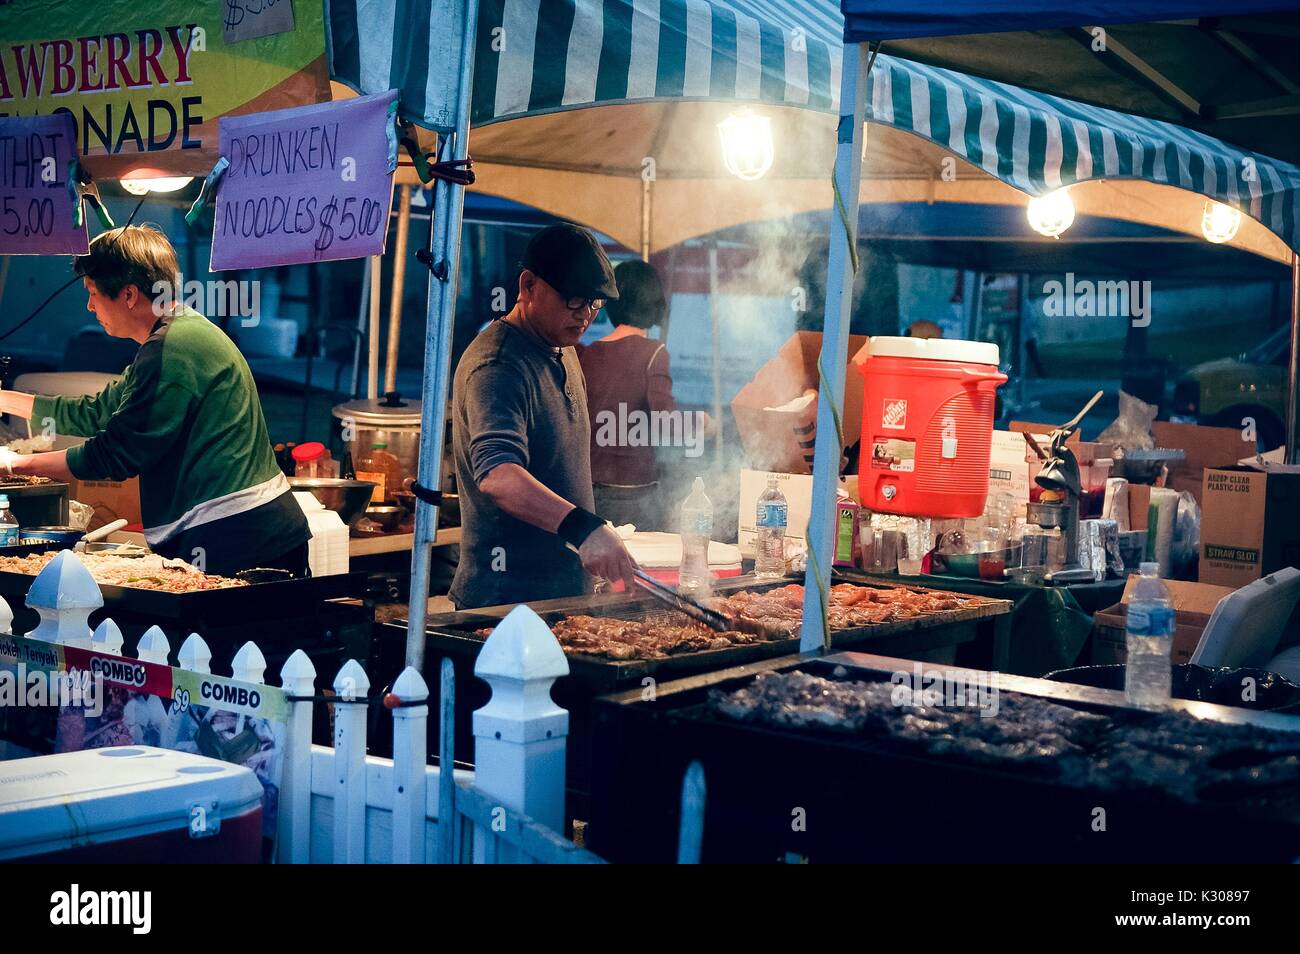 Two men stand in front of large grills cooking chicken on skewers at a food booth at dusk, during Spring Fair, a student-run spring carnival at Johns Hopkins University, Baltimore, Maryland, April, 2016. Courtesy Eric Chen. Stock Photo